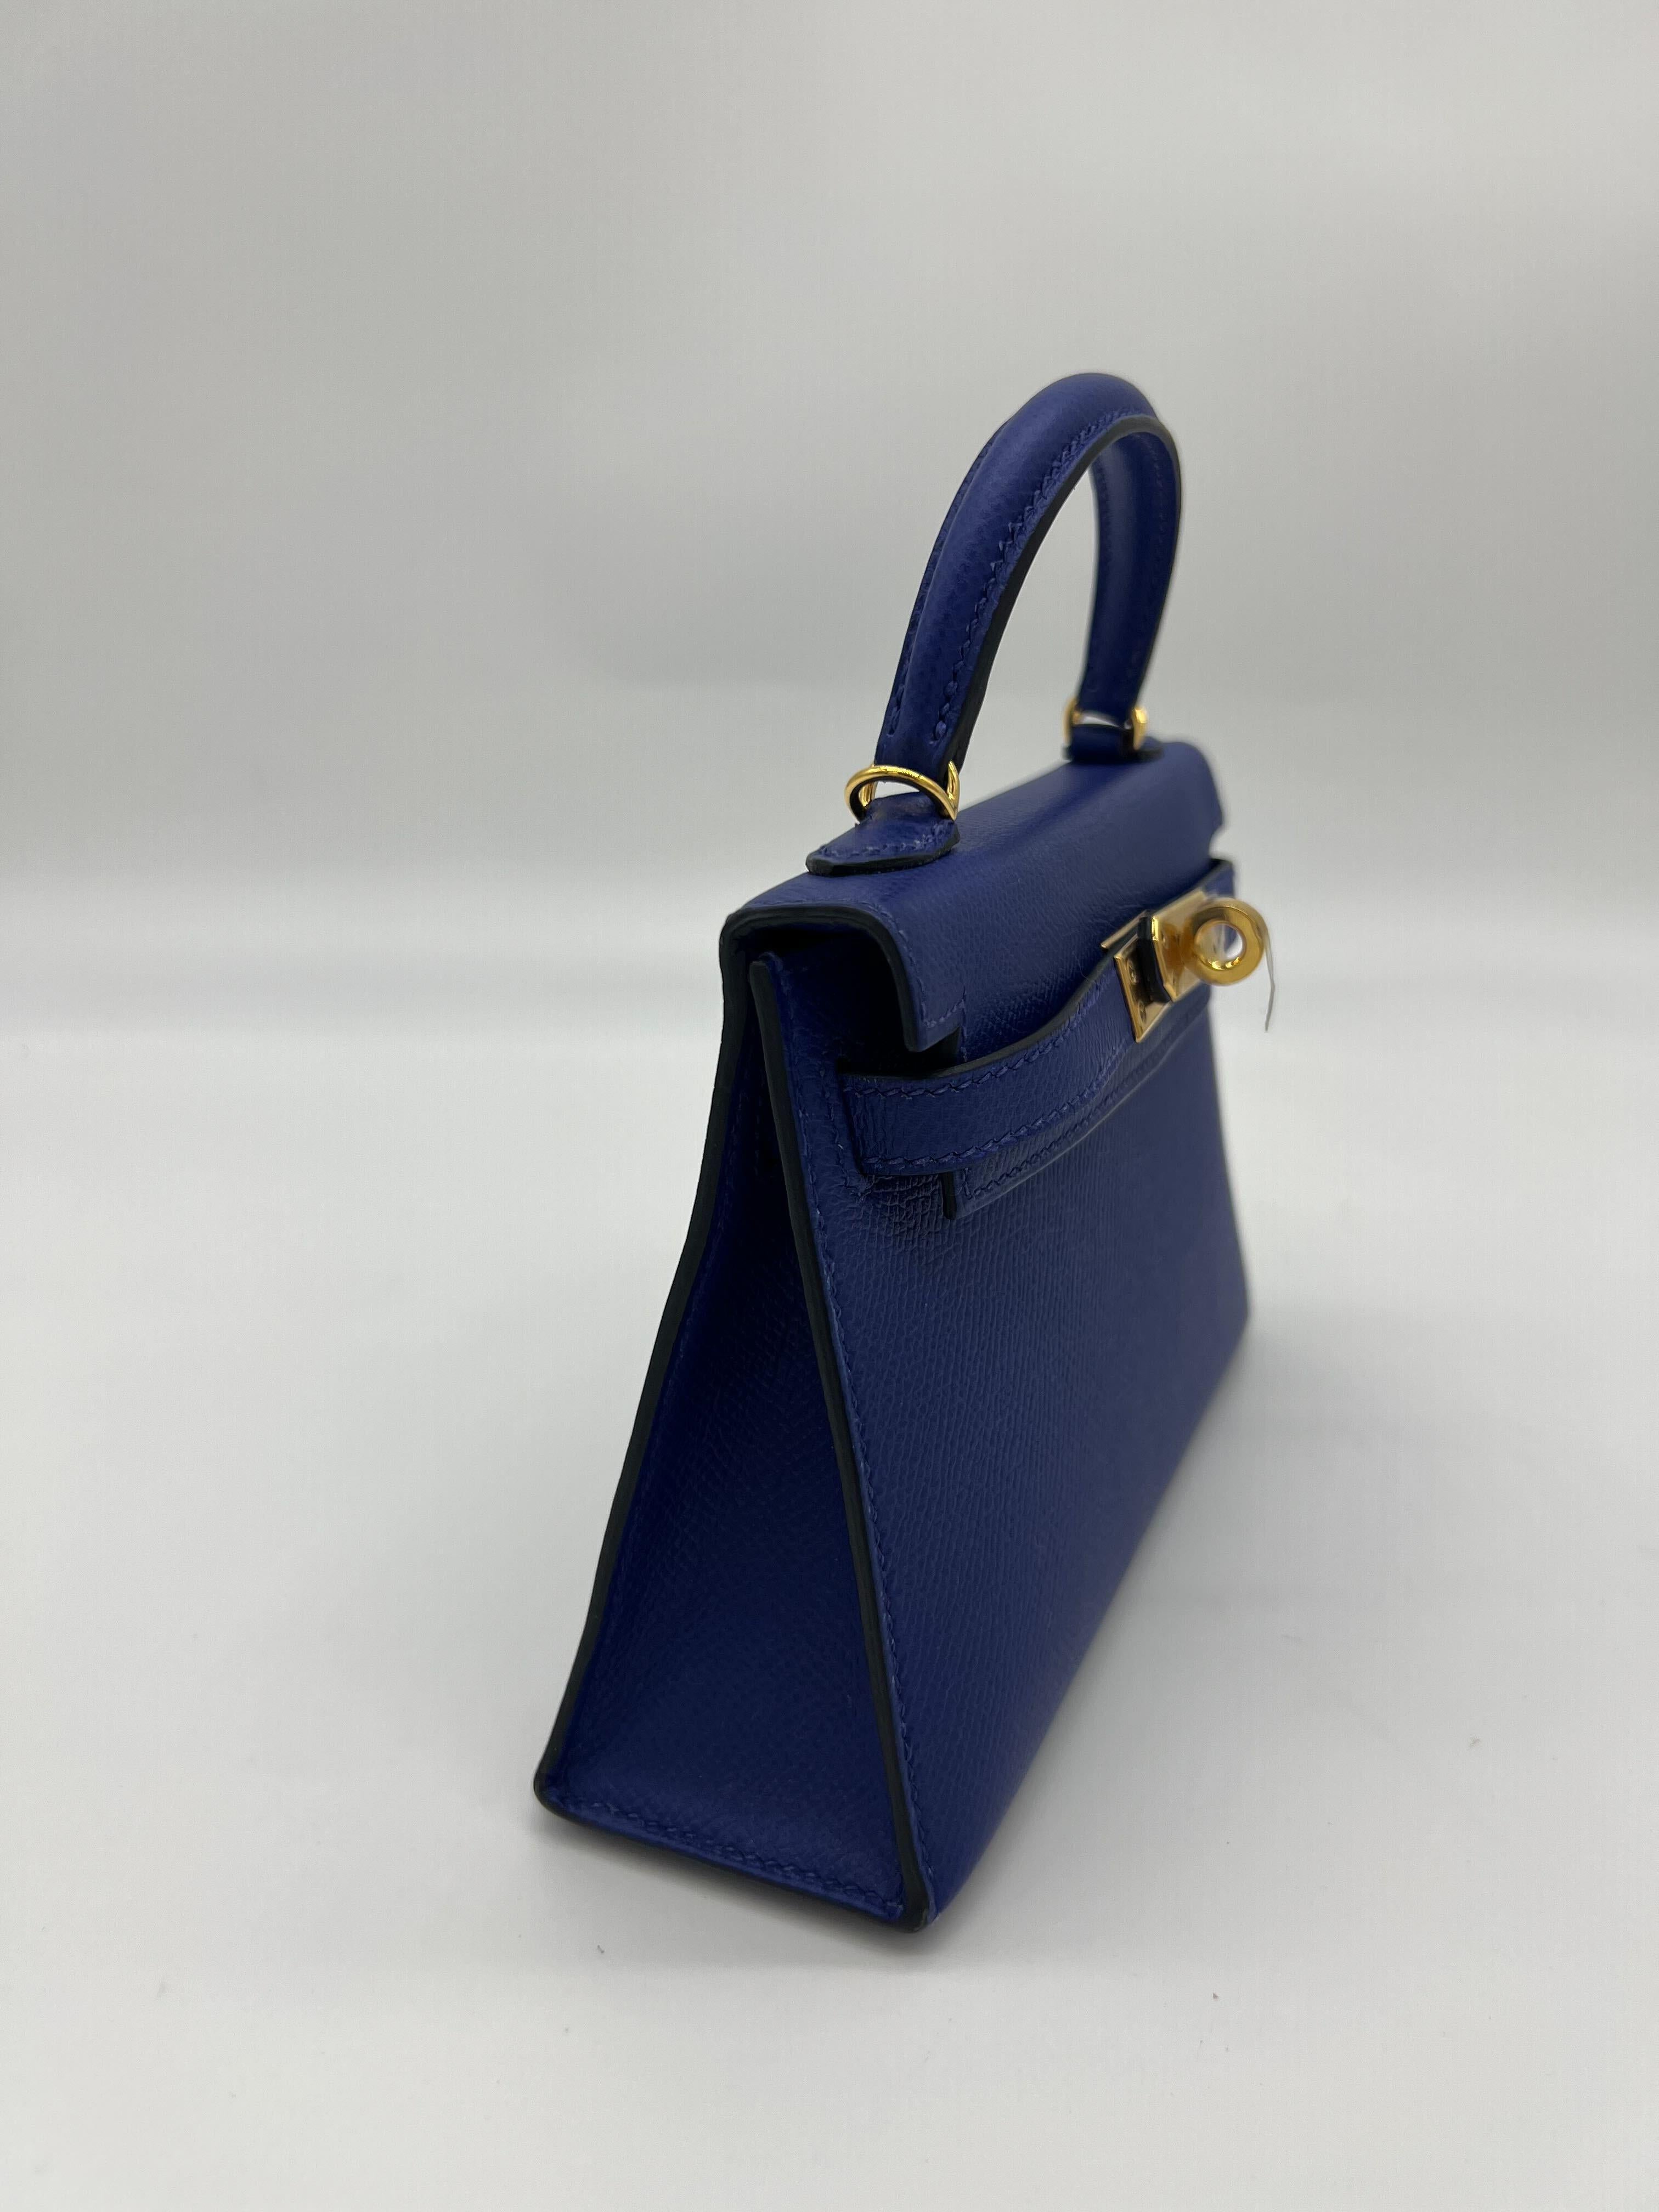 Hermes Kelly 20 Mini Bleu Electrique Epsom Gold Hardware In Excellent Condition For Sale In New York, NY